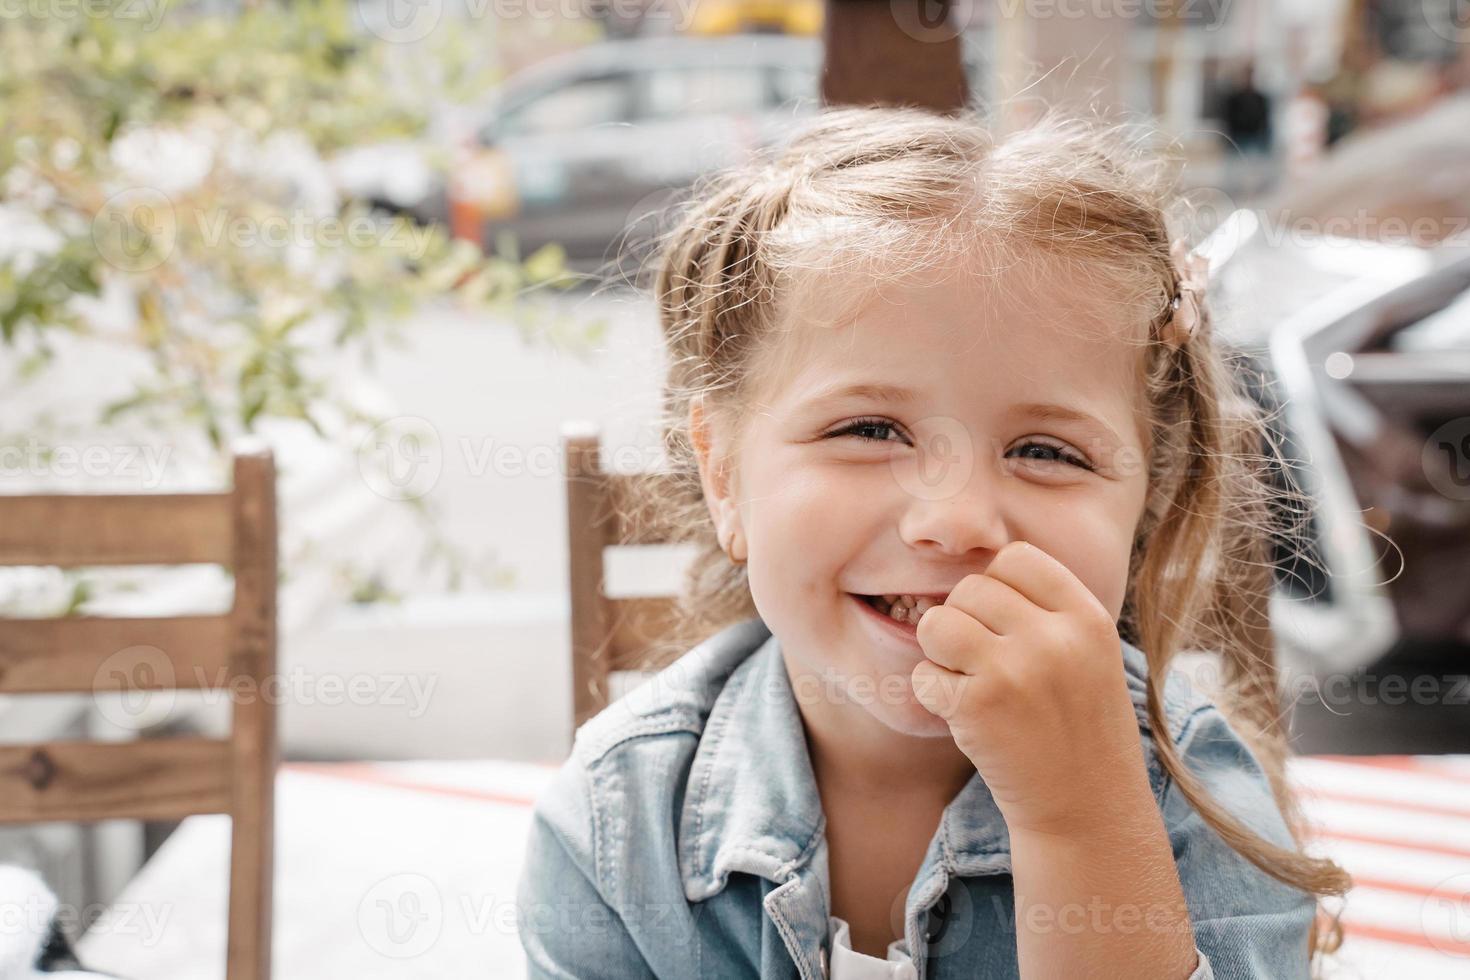 Little girl in a street cafe with french fries photo